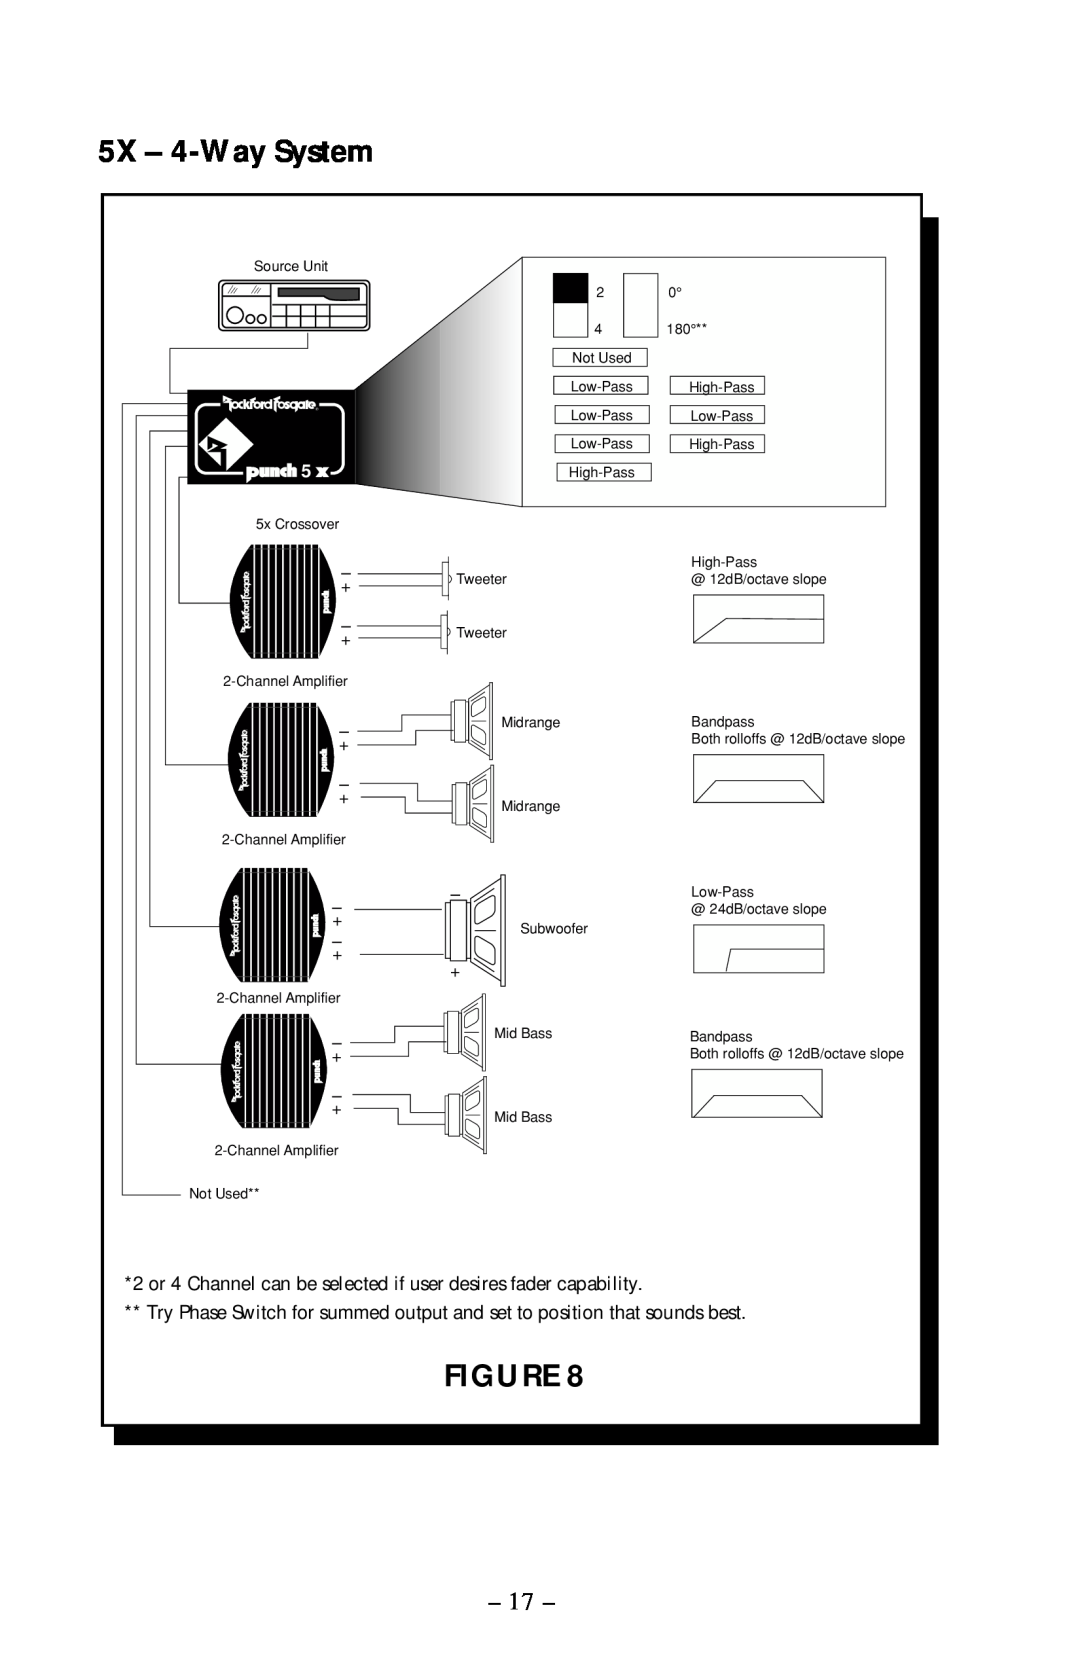 Rockford Fosgate 2X, 3X owner manual 5X - 4-Way System, 2 or 4 Channel can be selected if user desires fader capability 